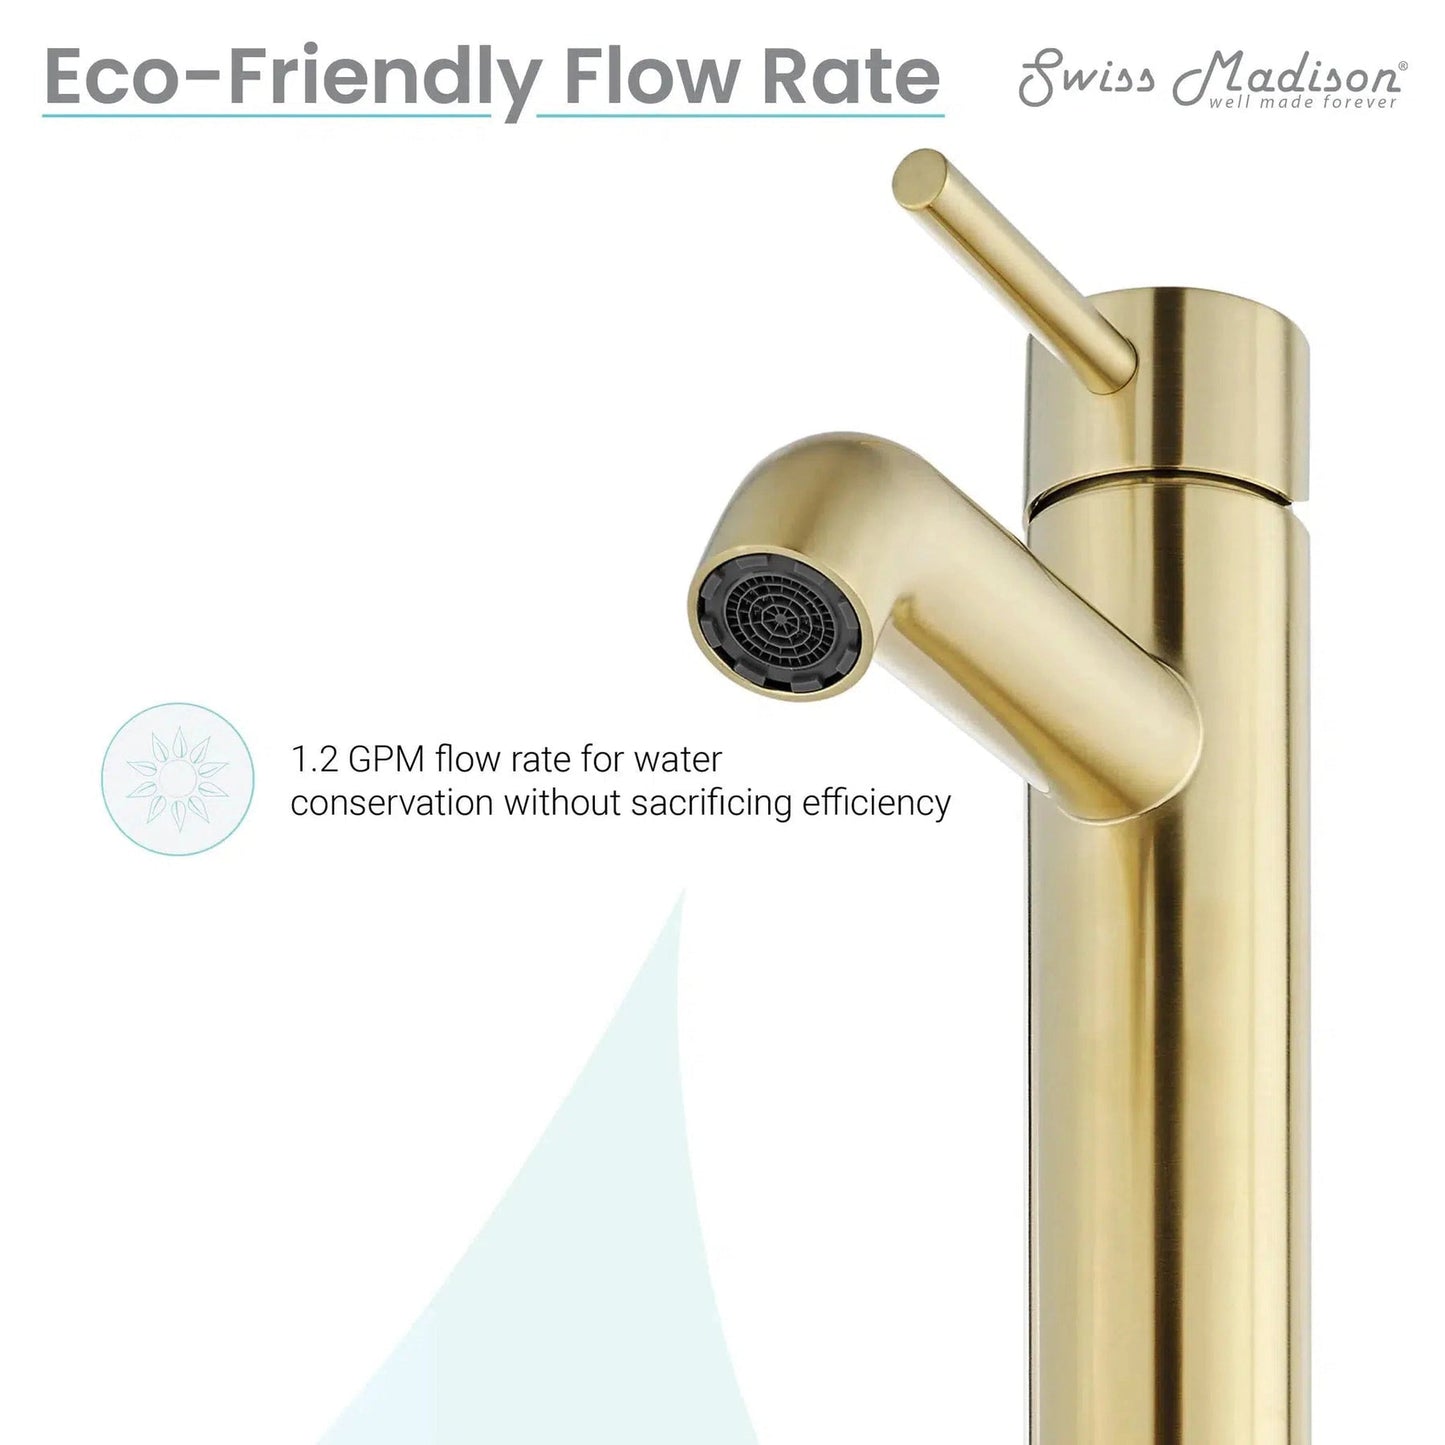 Swiss Madison Ivy 13" Single-Handle Brushed Gold Bathroom Faucet With 1.2 GPM Flow Rate